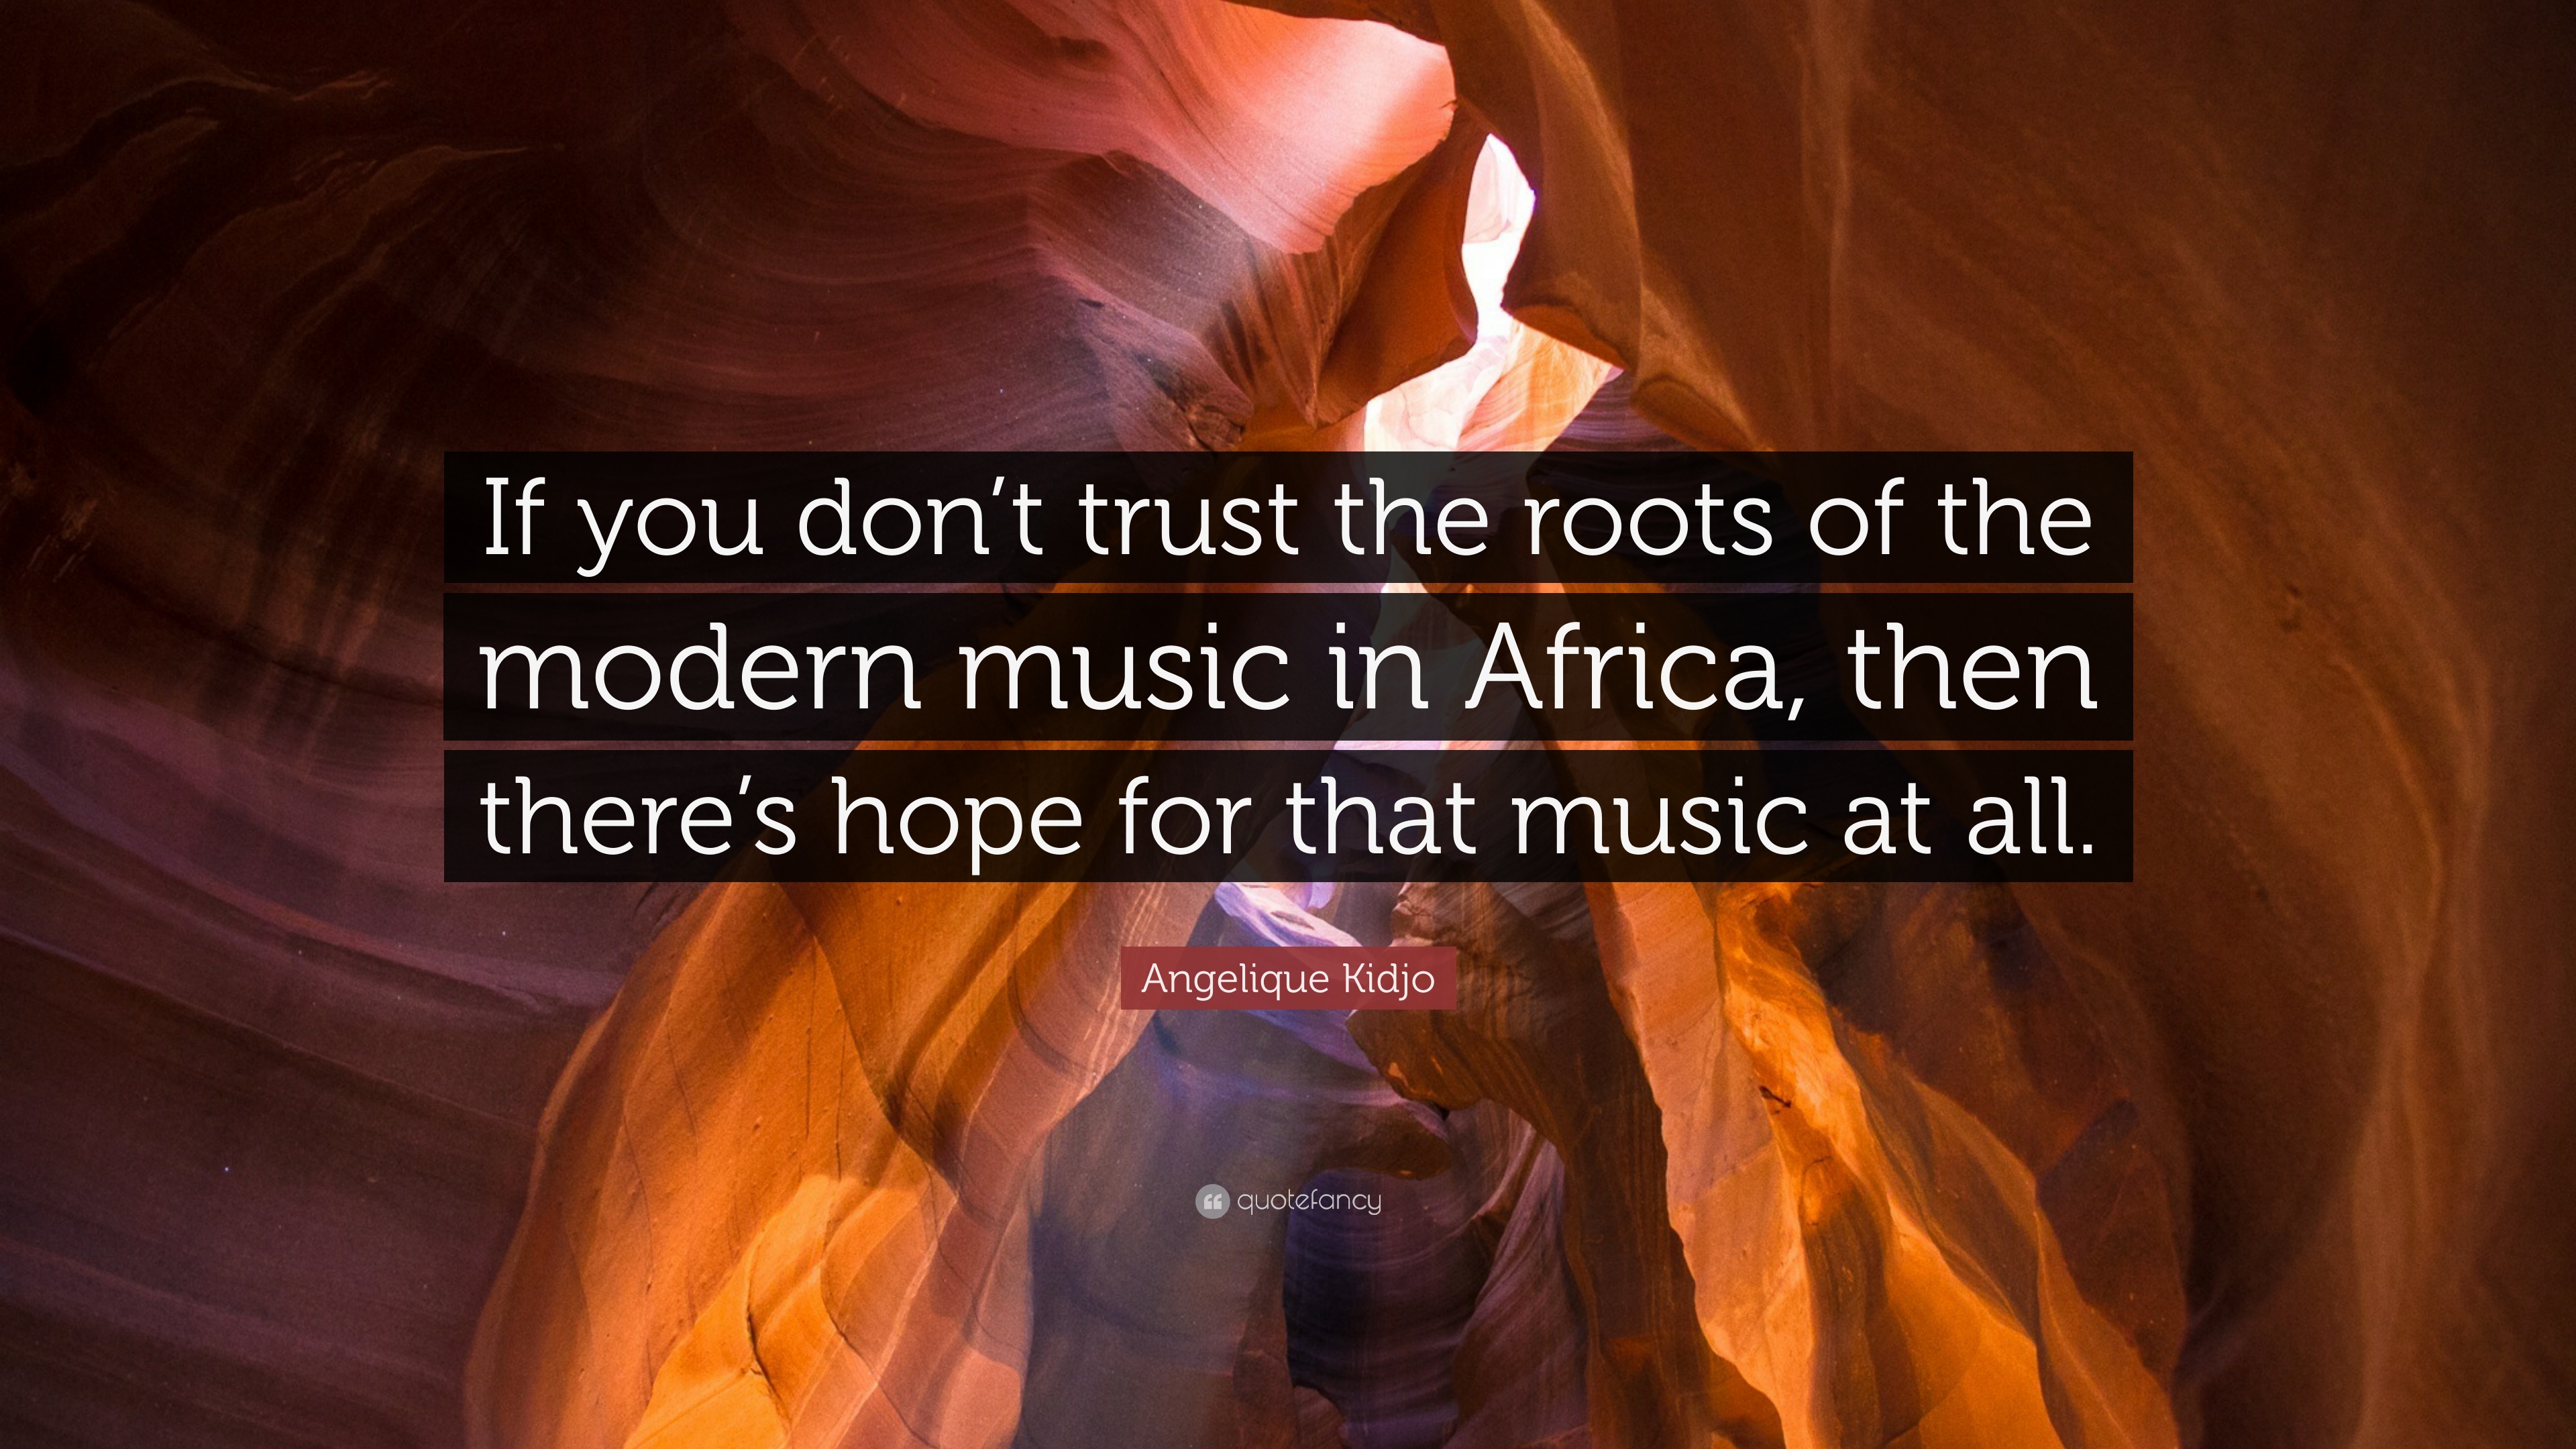 Angelique Kidjo Quote: “If you don't trust the roots of the modern